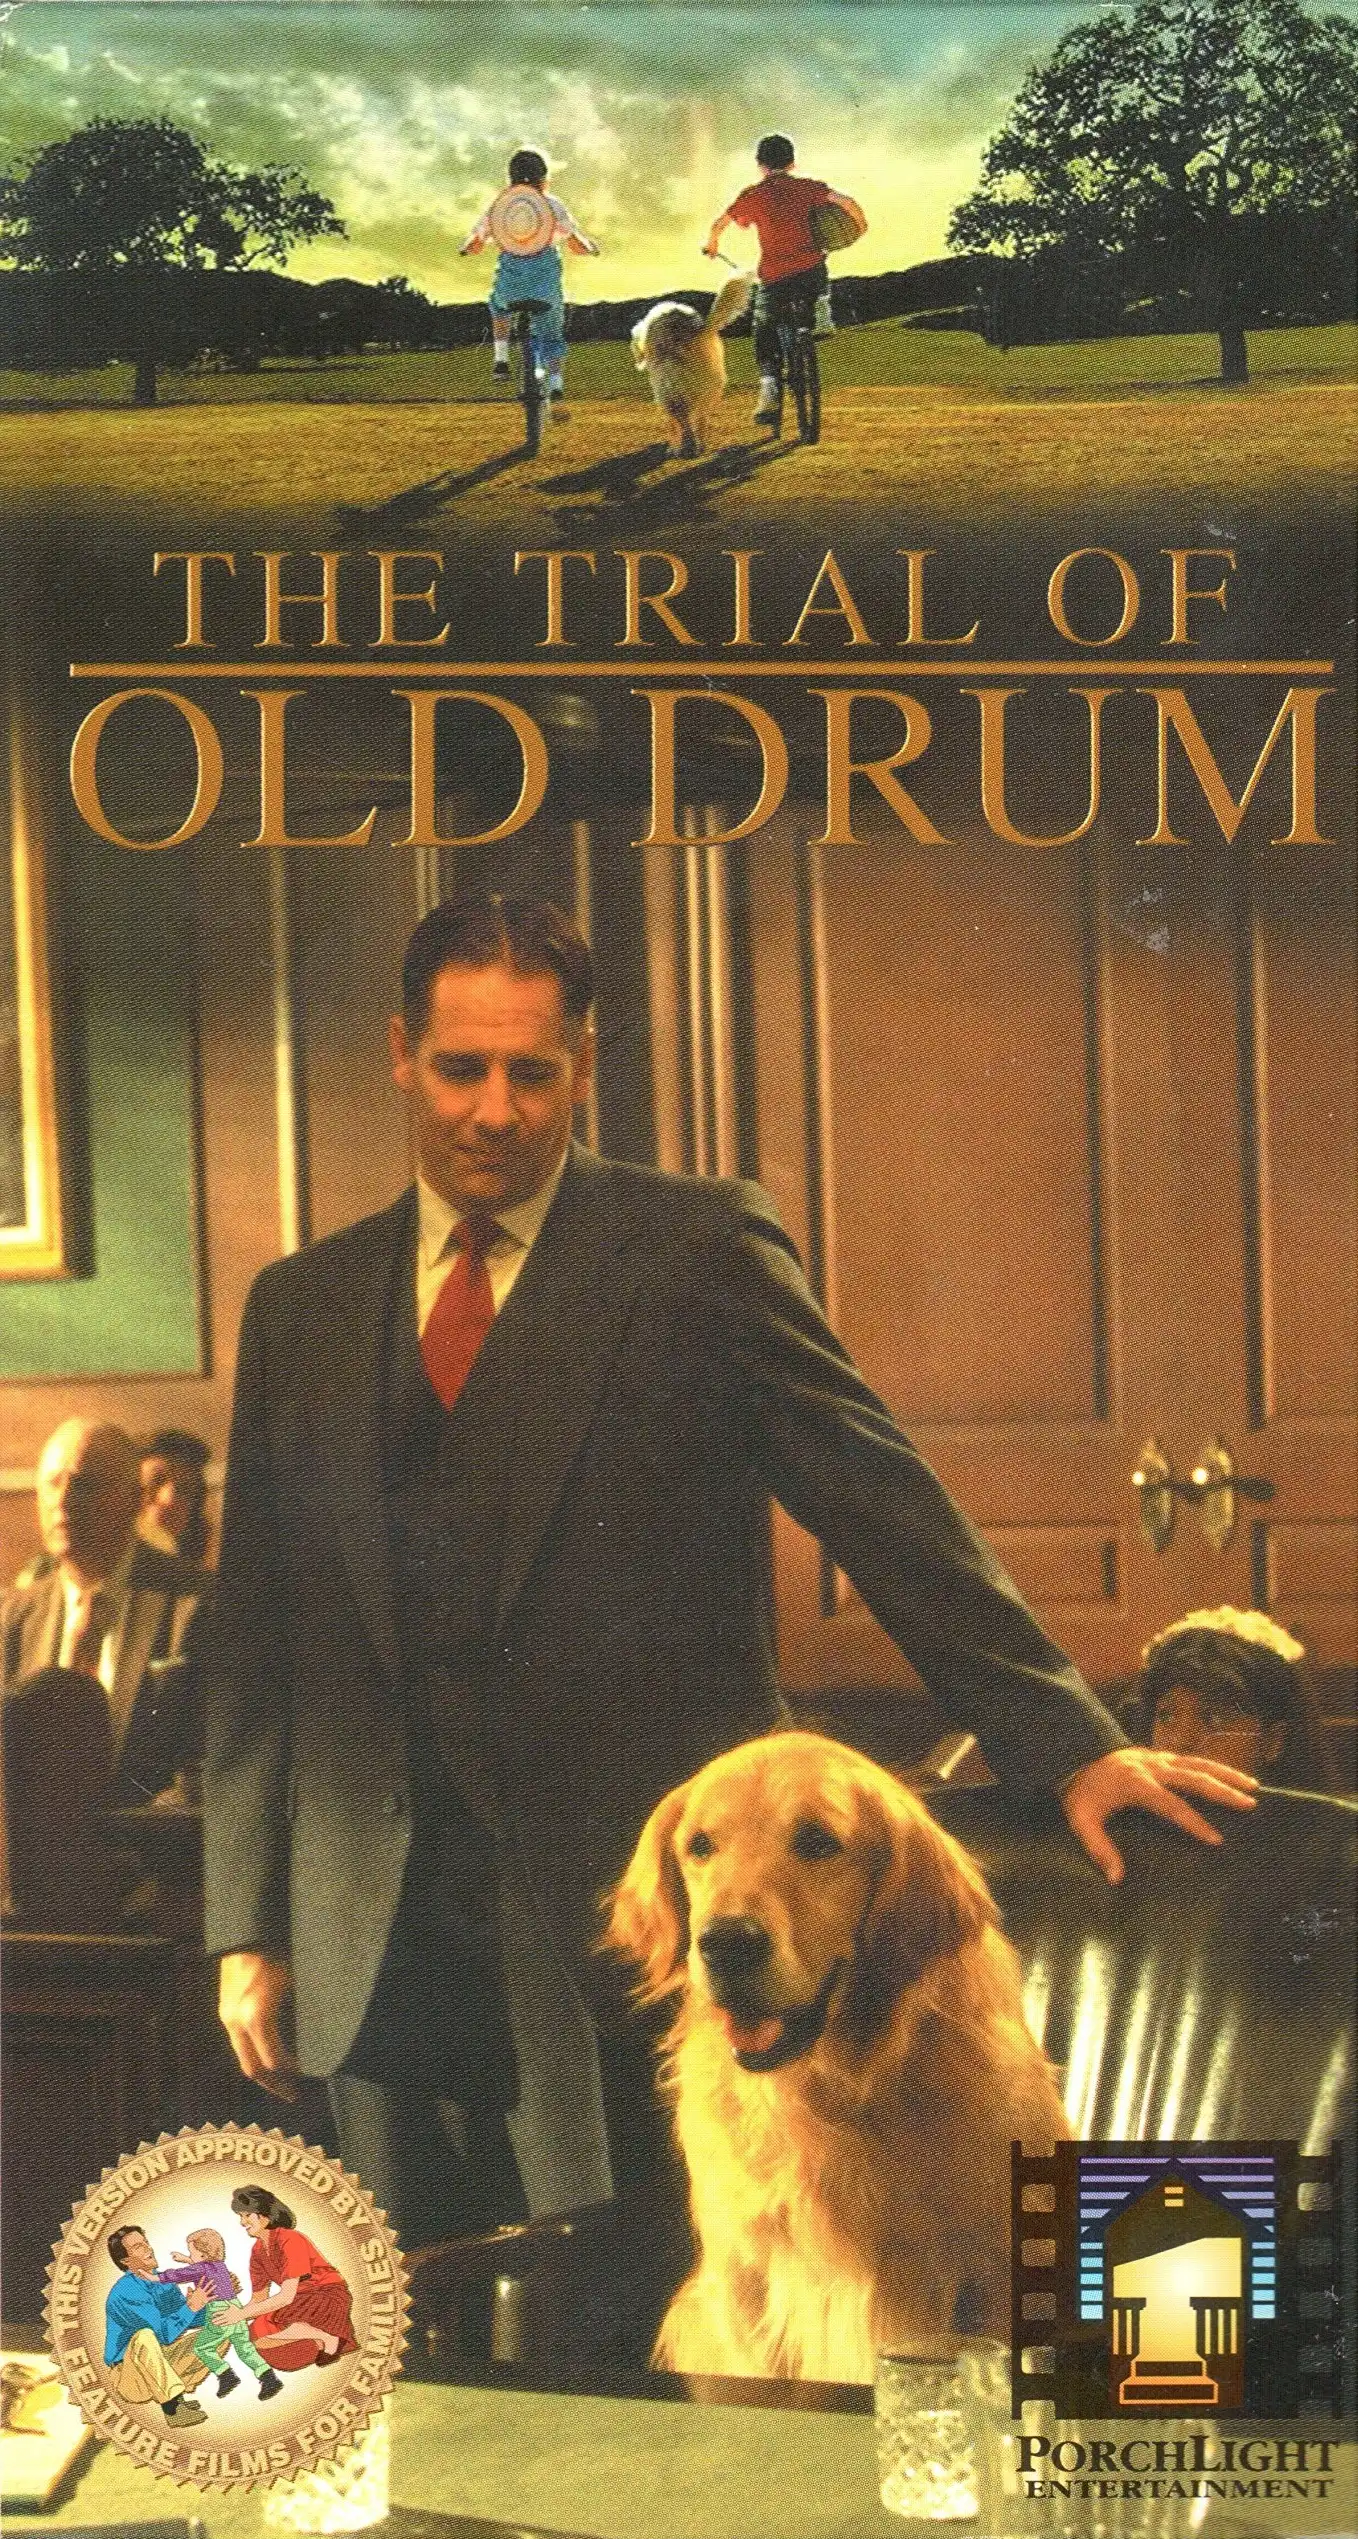 Watch and Download The Trial of Old Drum 1